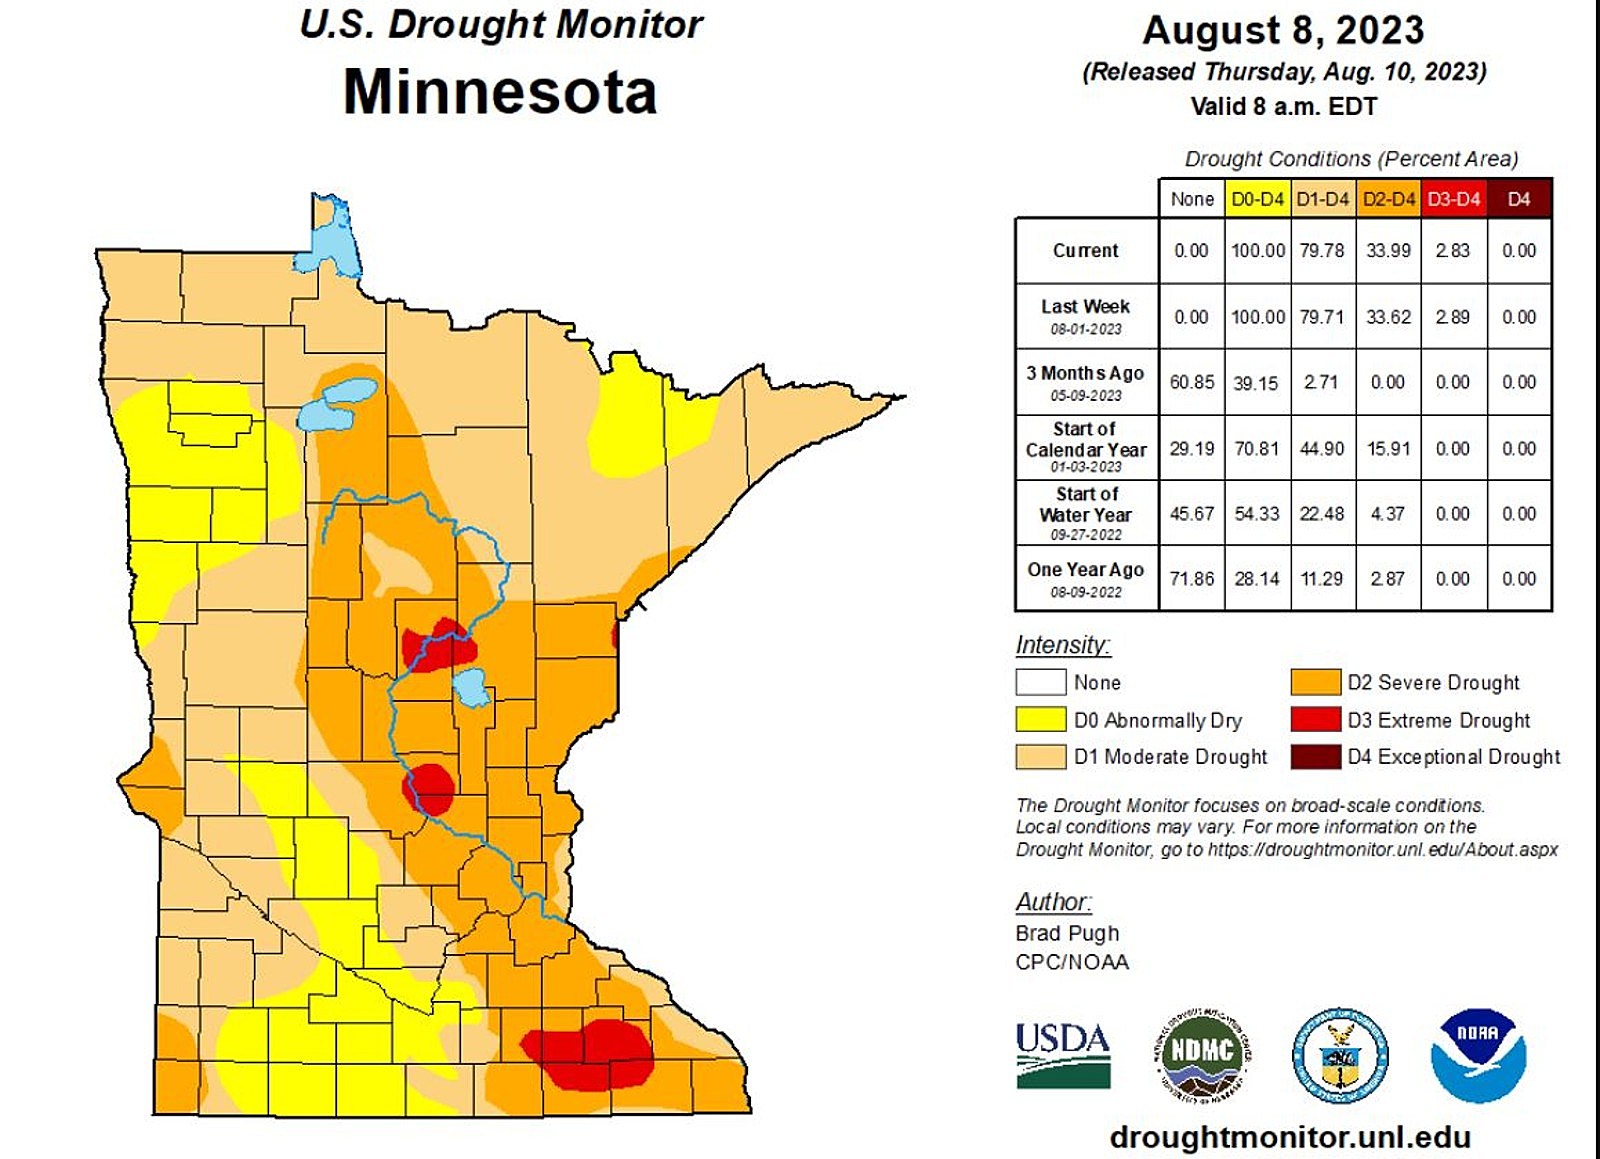 Minnesota Drought Conditions Persist With Little Relief pic